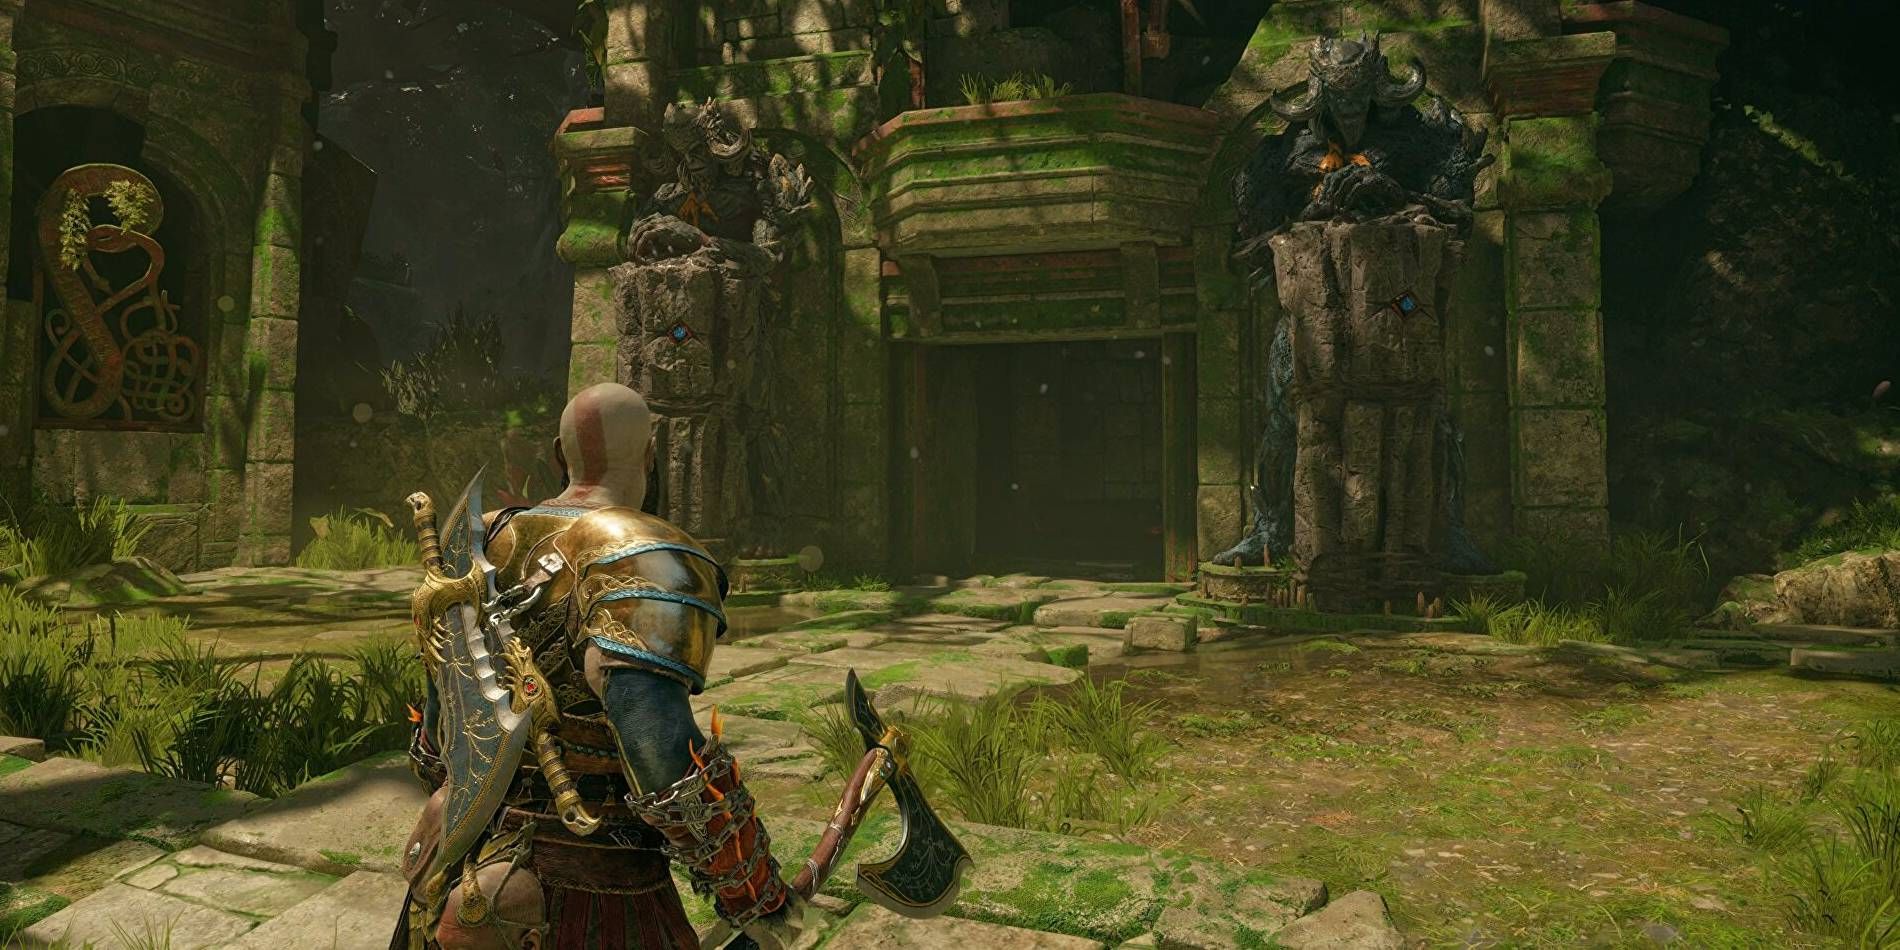 God of War Ragnarok Shrine In Jungles of Vanaheim Kratos Exploring Realm to Collect Artefacts and Other Items/Resources